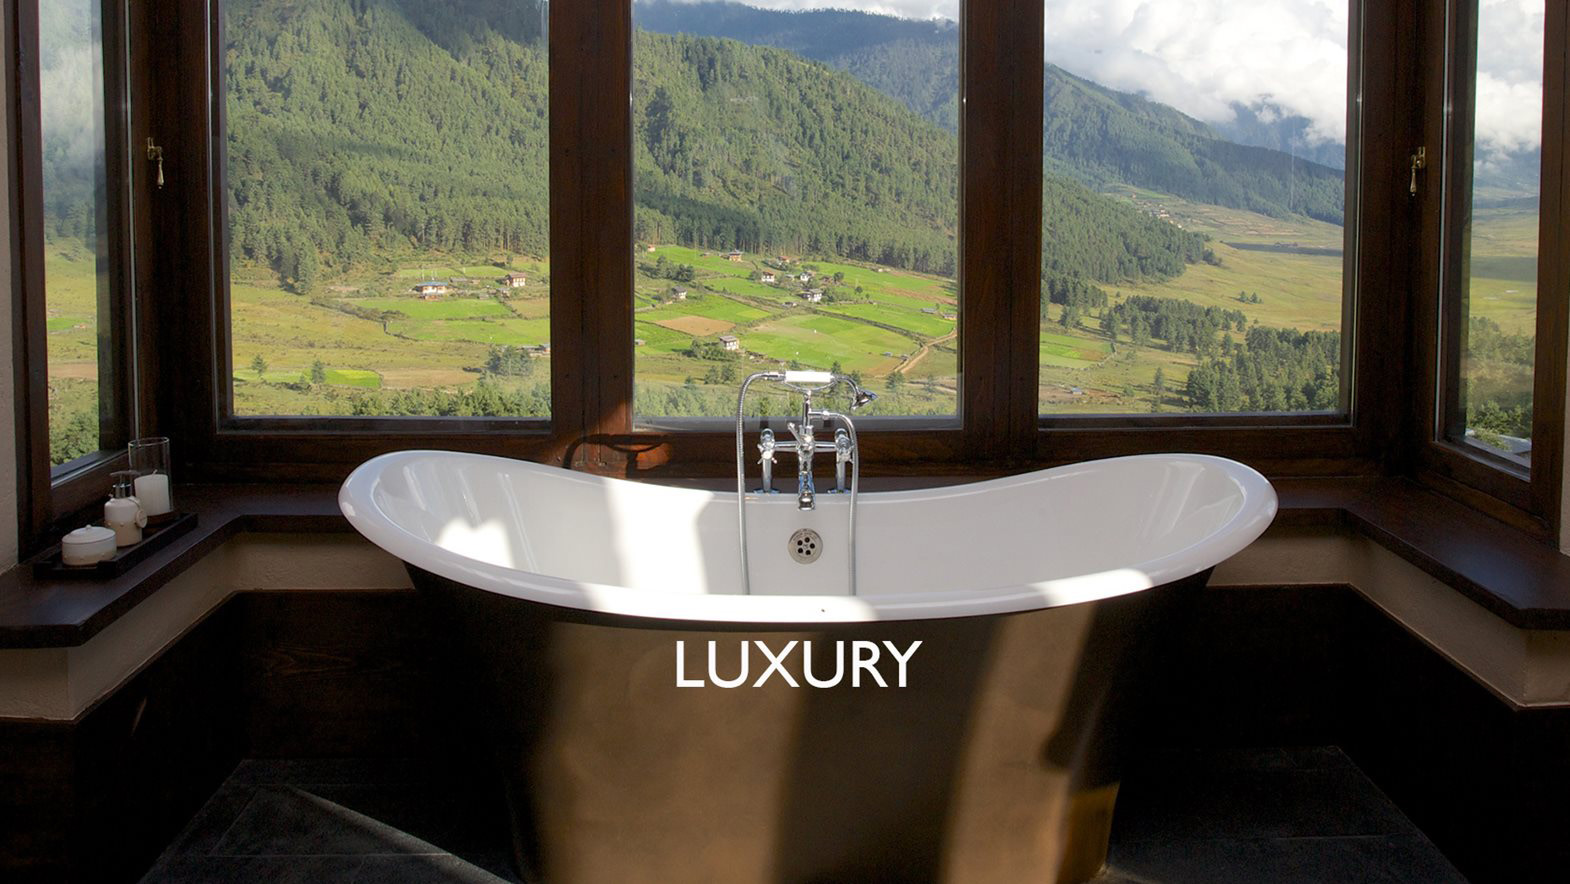 For ultra luxury to the pure simplicity of a homestay